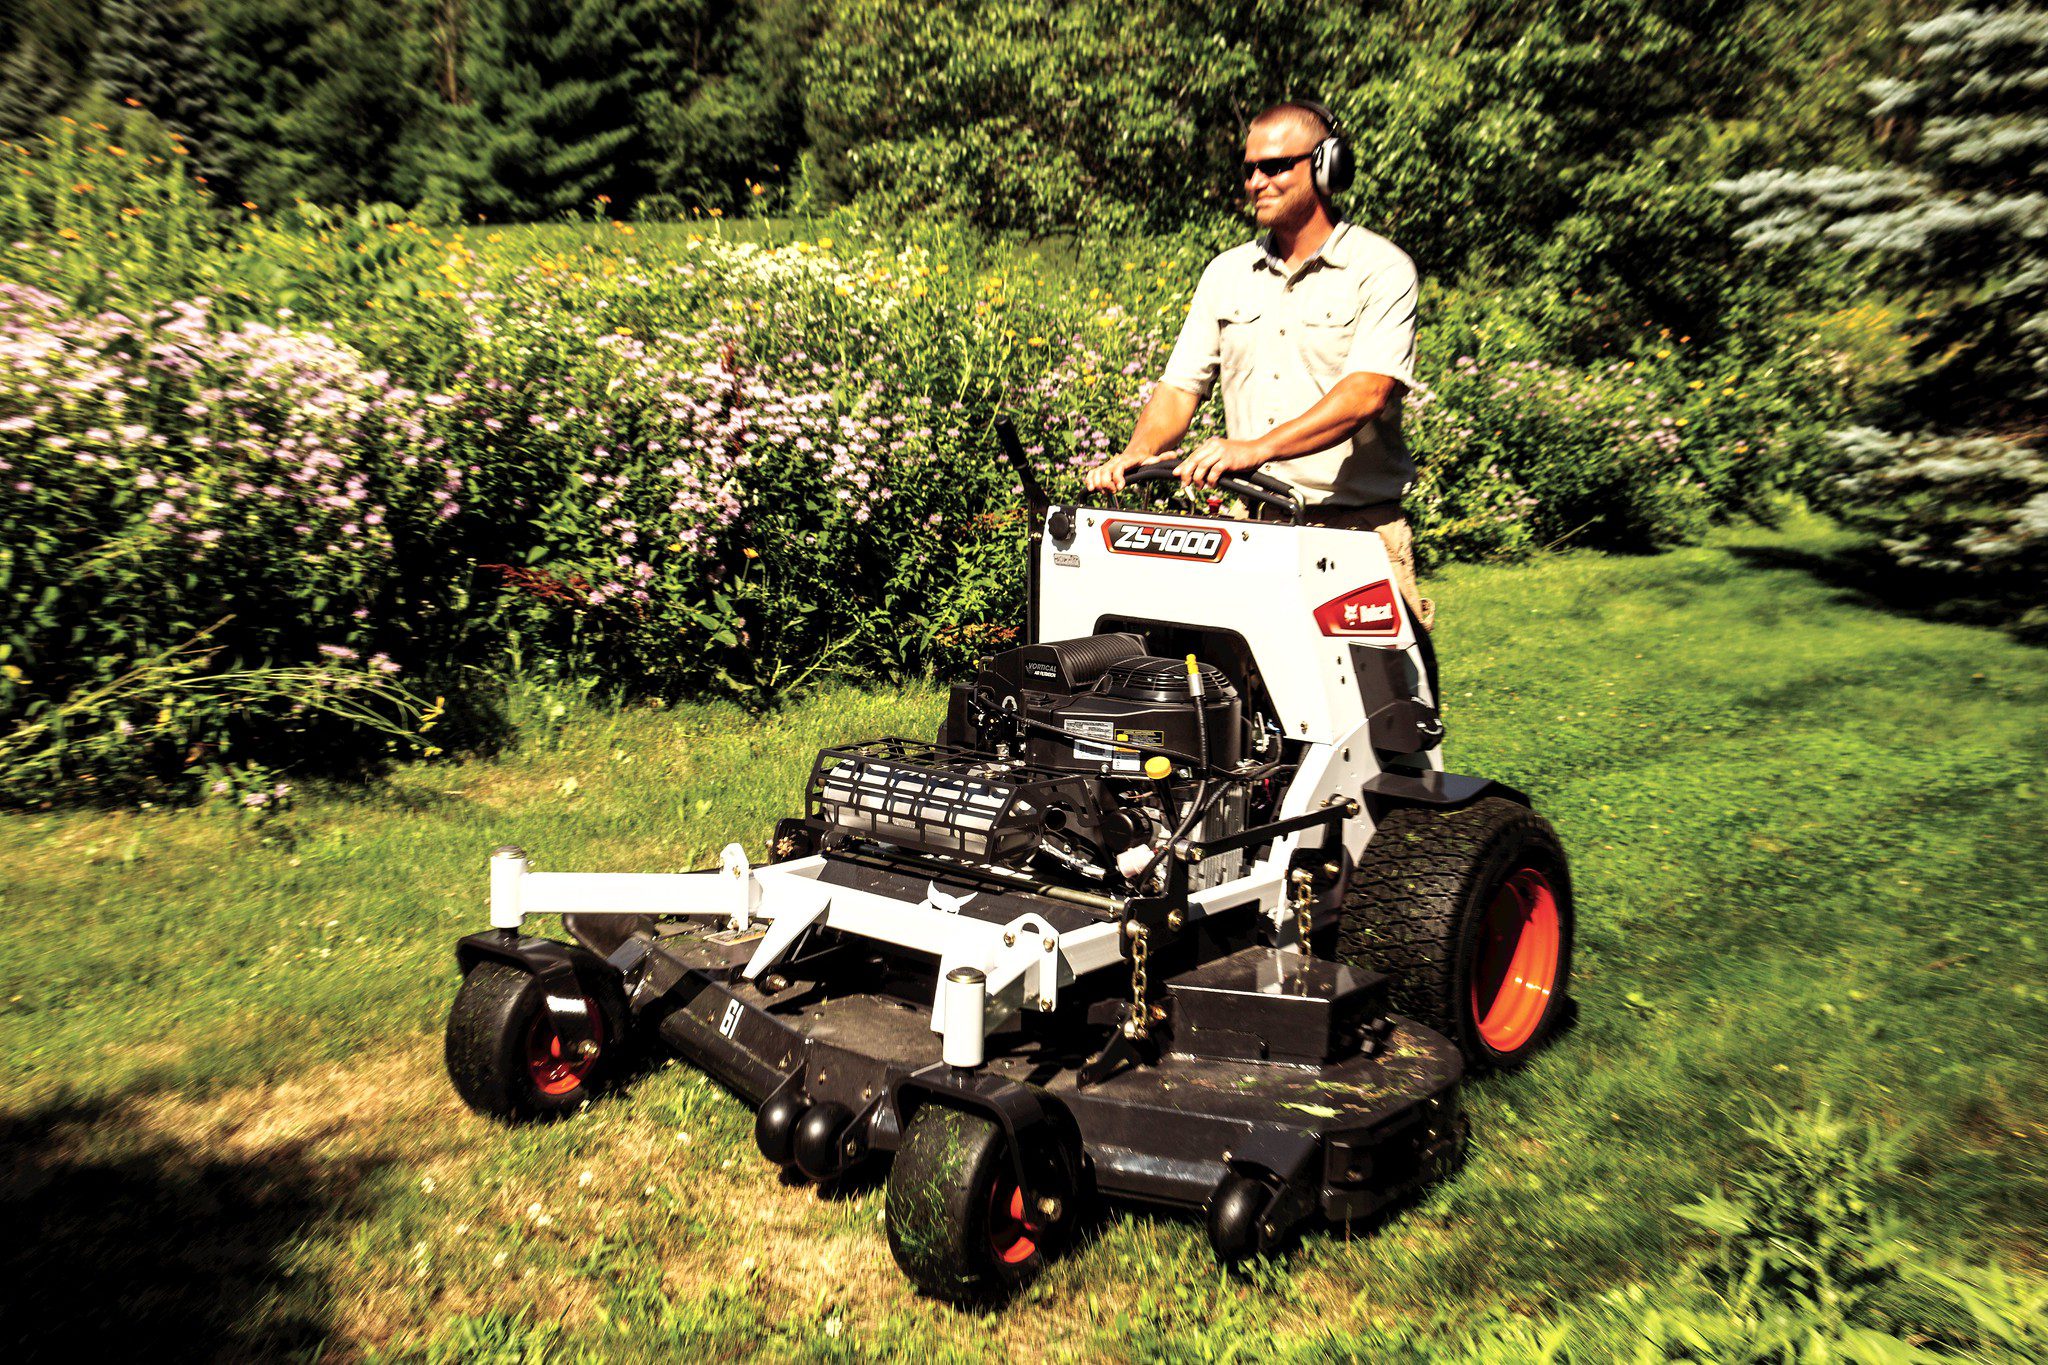 Browse Specs and more for the ZS4000 Stand-On Mower 36″ - Bobcat of the Rockies